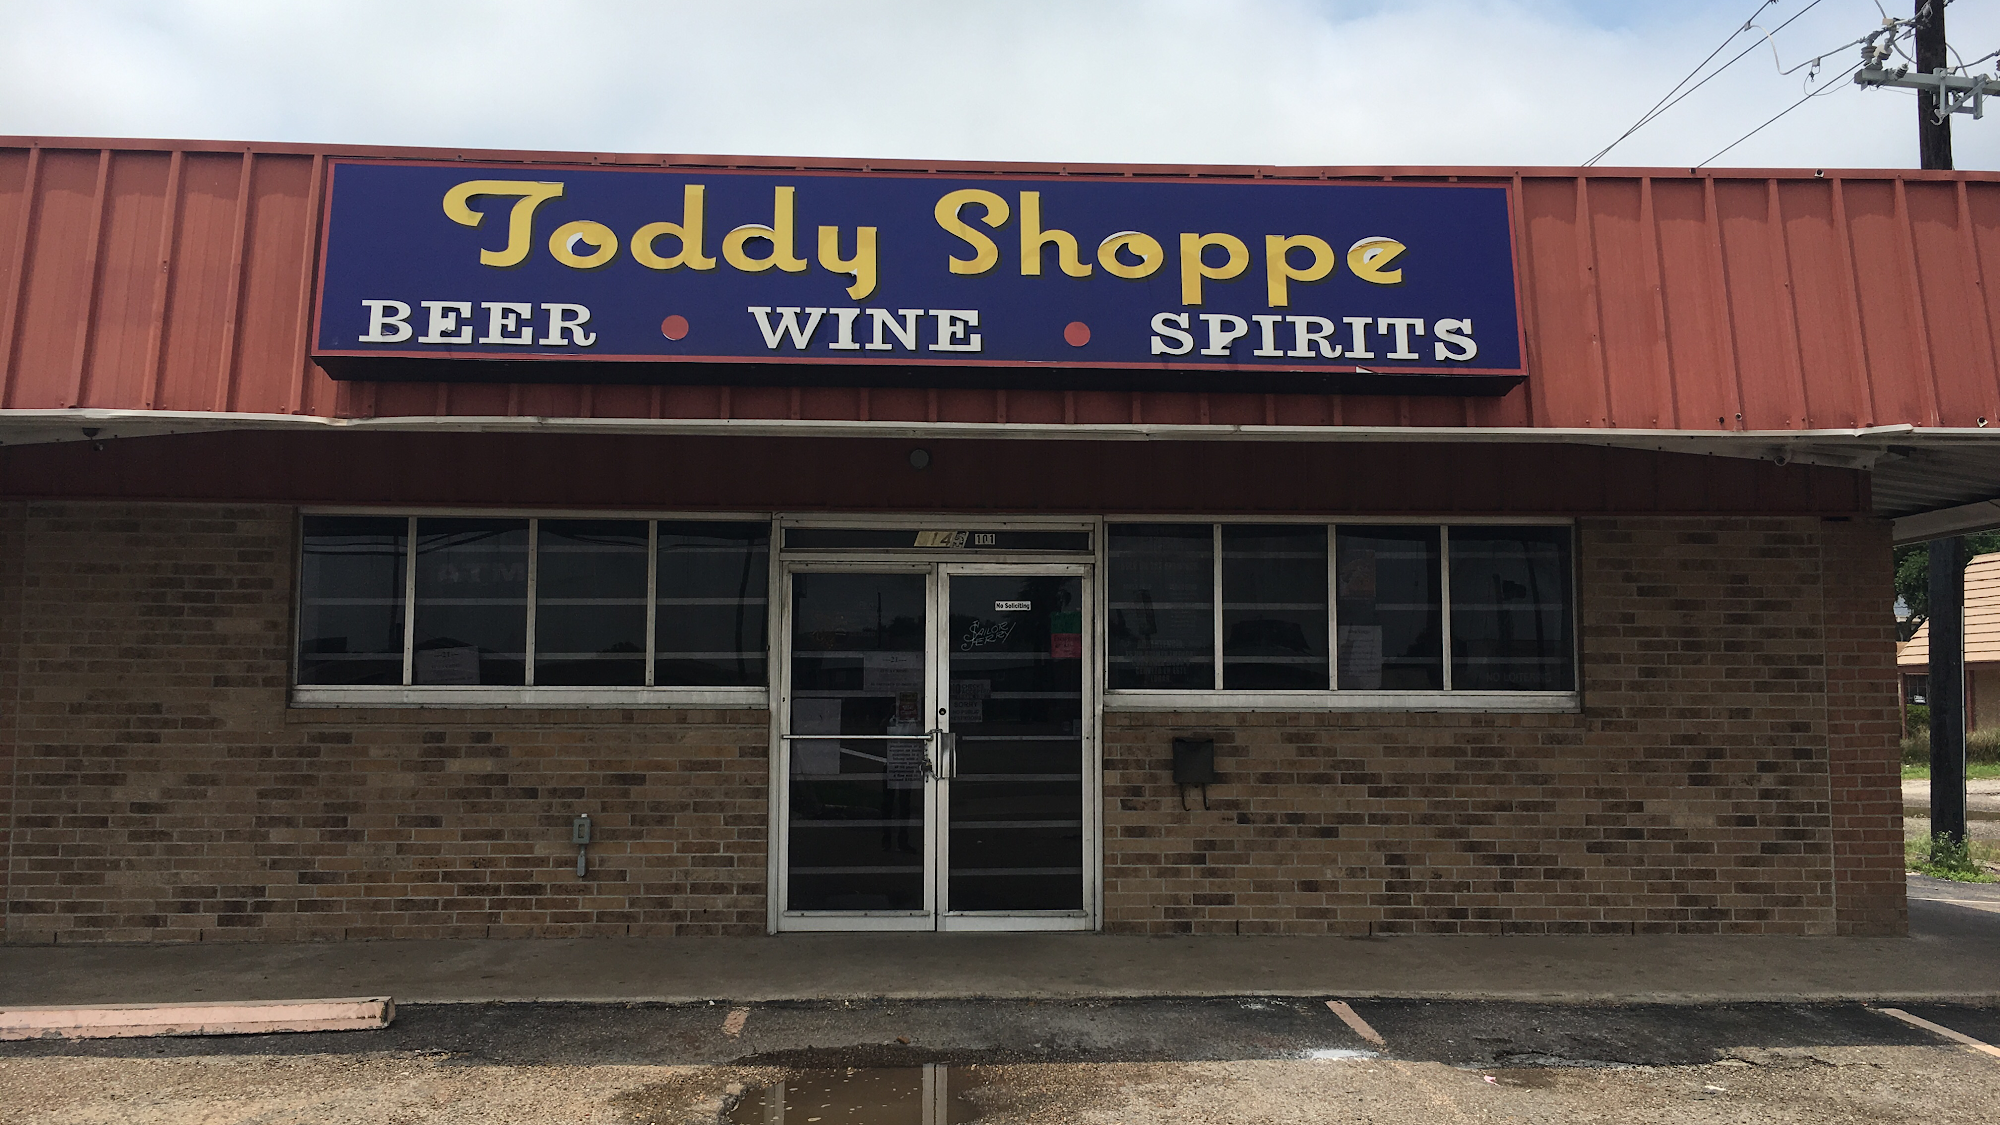 Toddy shoppe